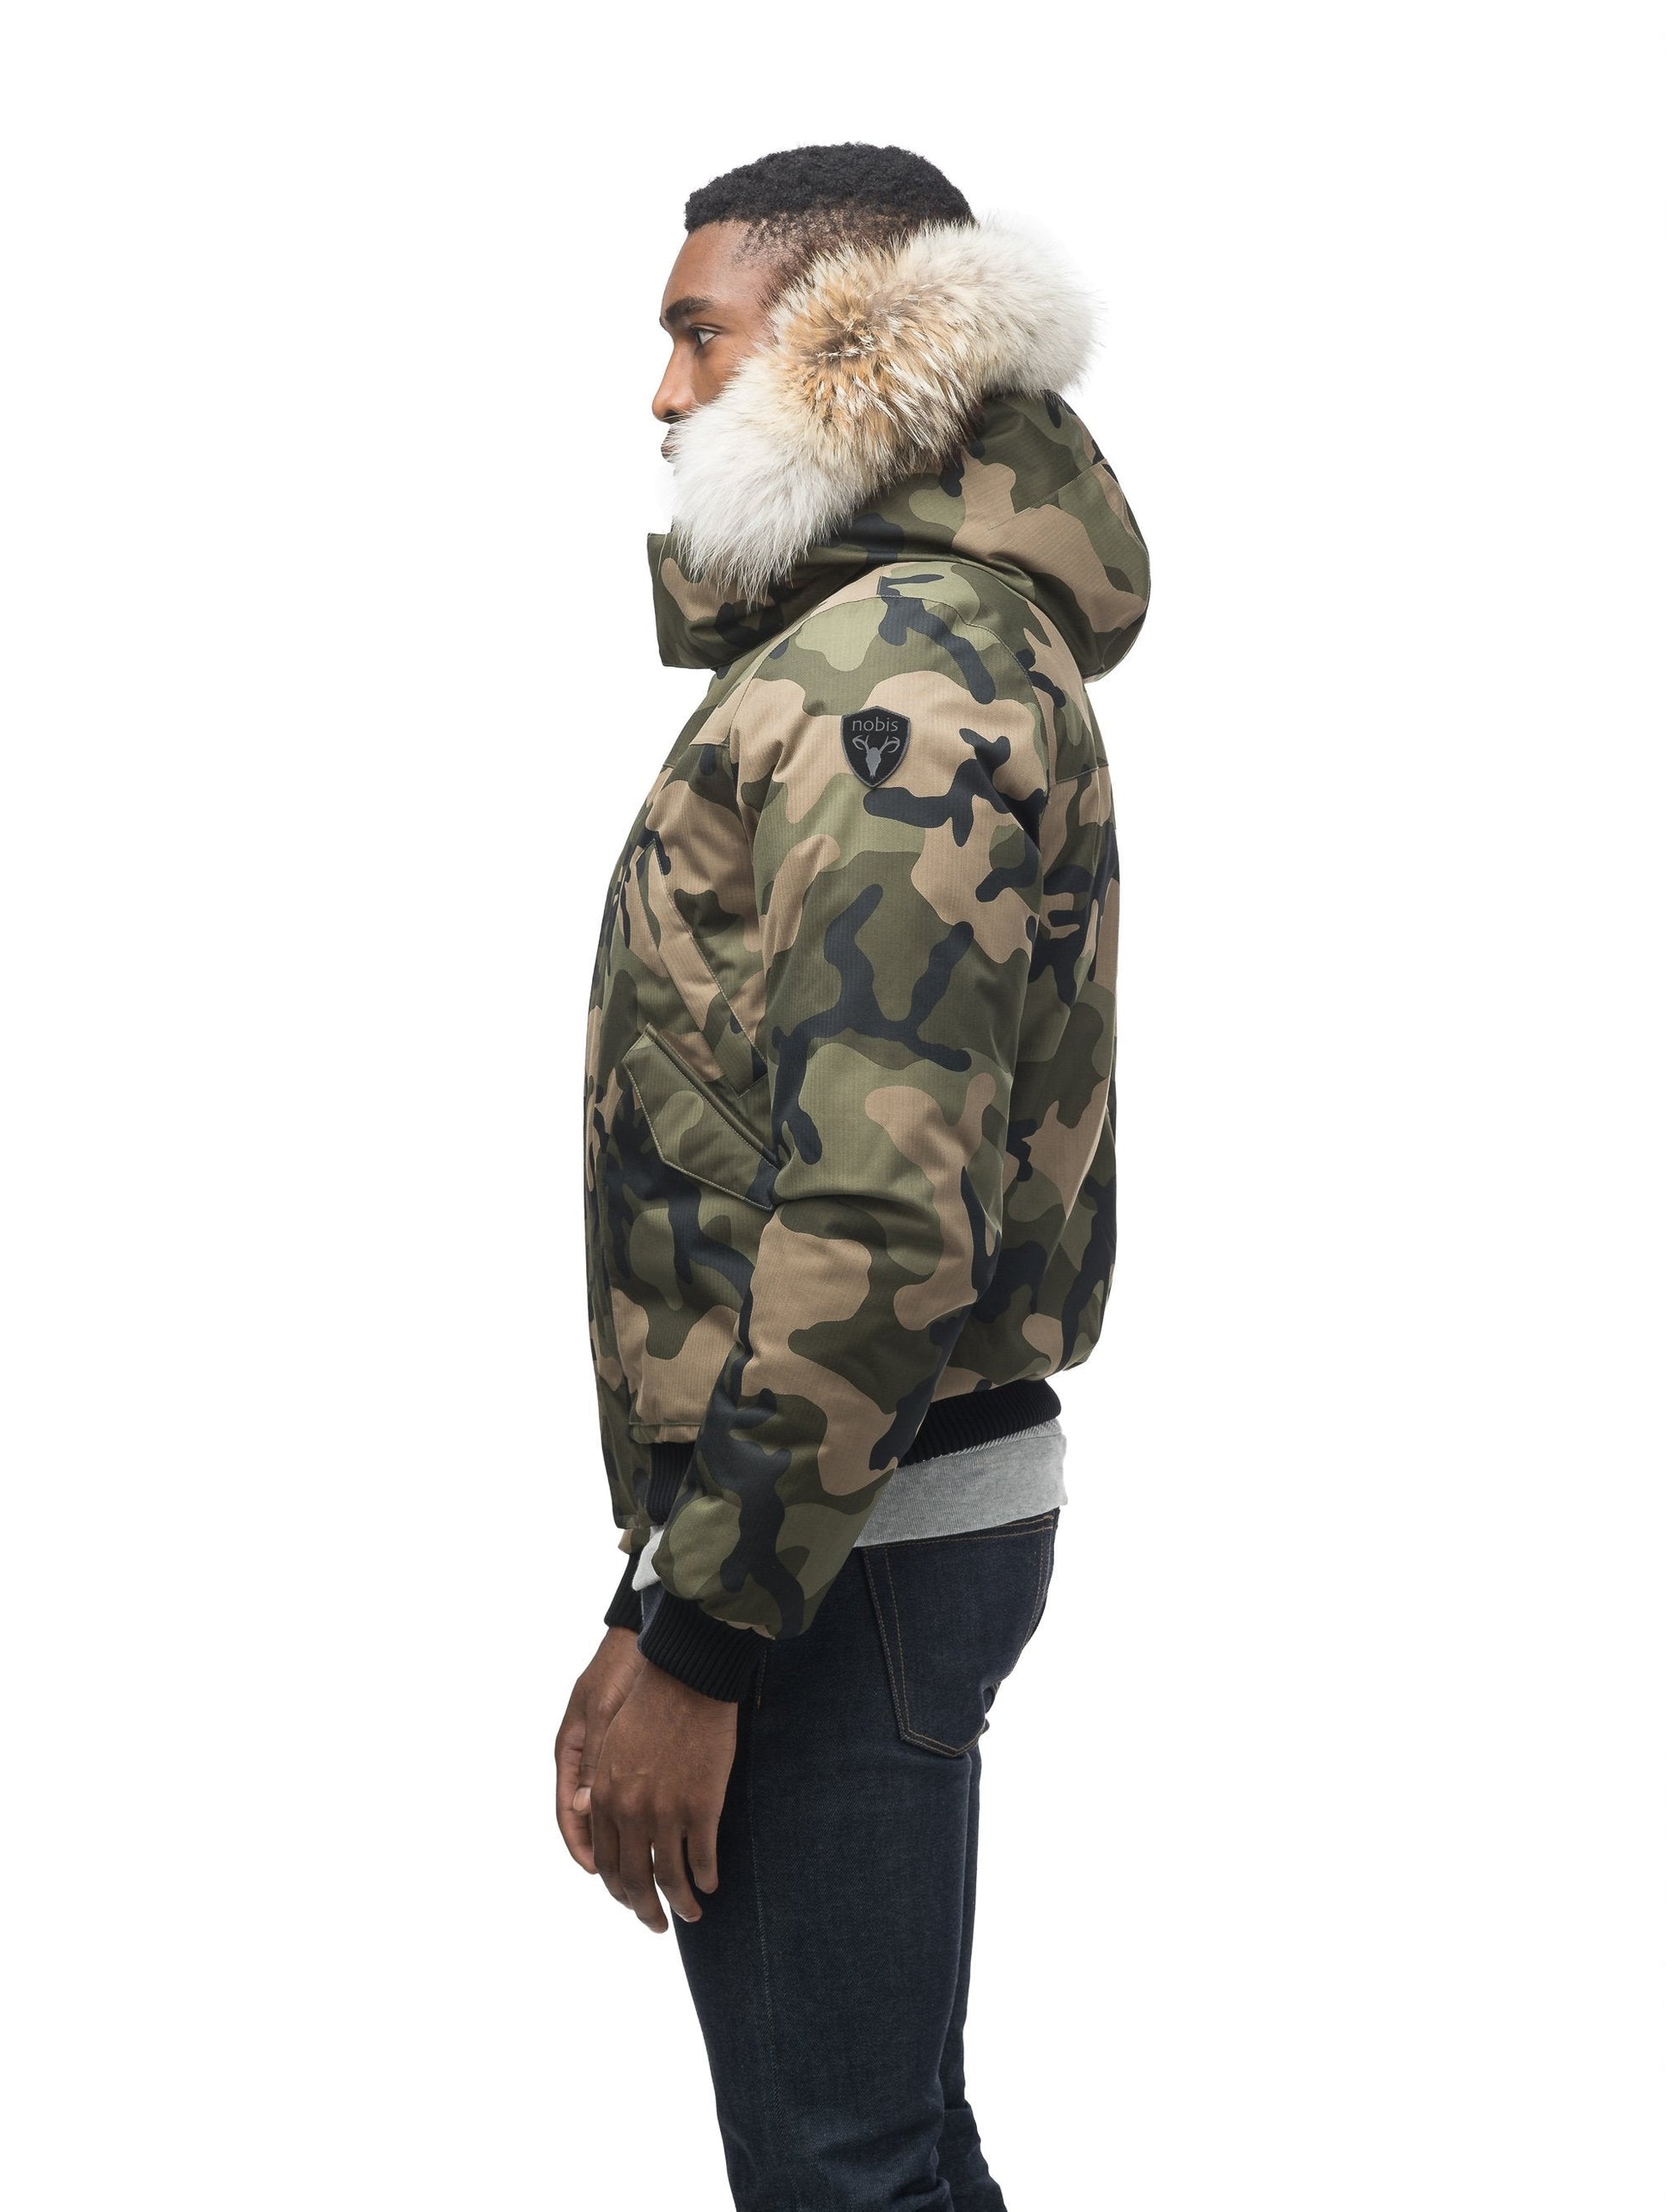 Men's classic down filled bomber jacket with a down filledÂ hood that features a removable coyote fur trim and concealed moldable framing wire in Camo